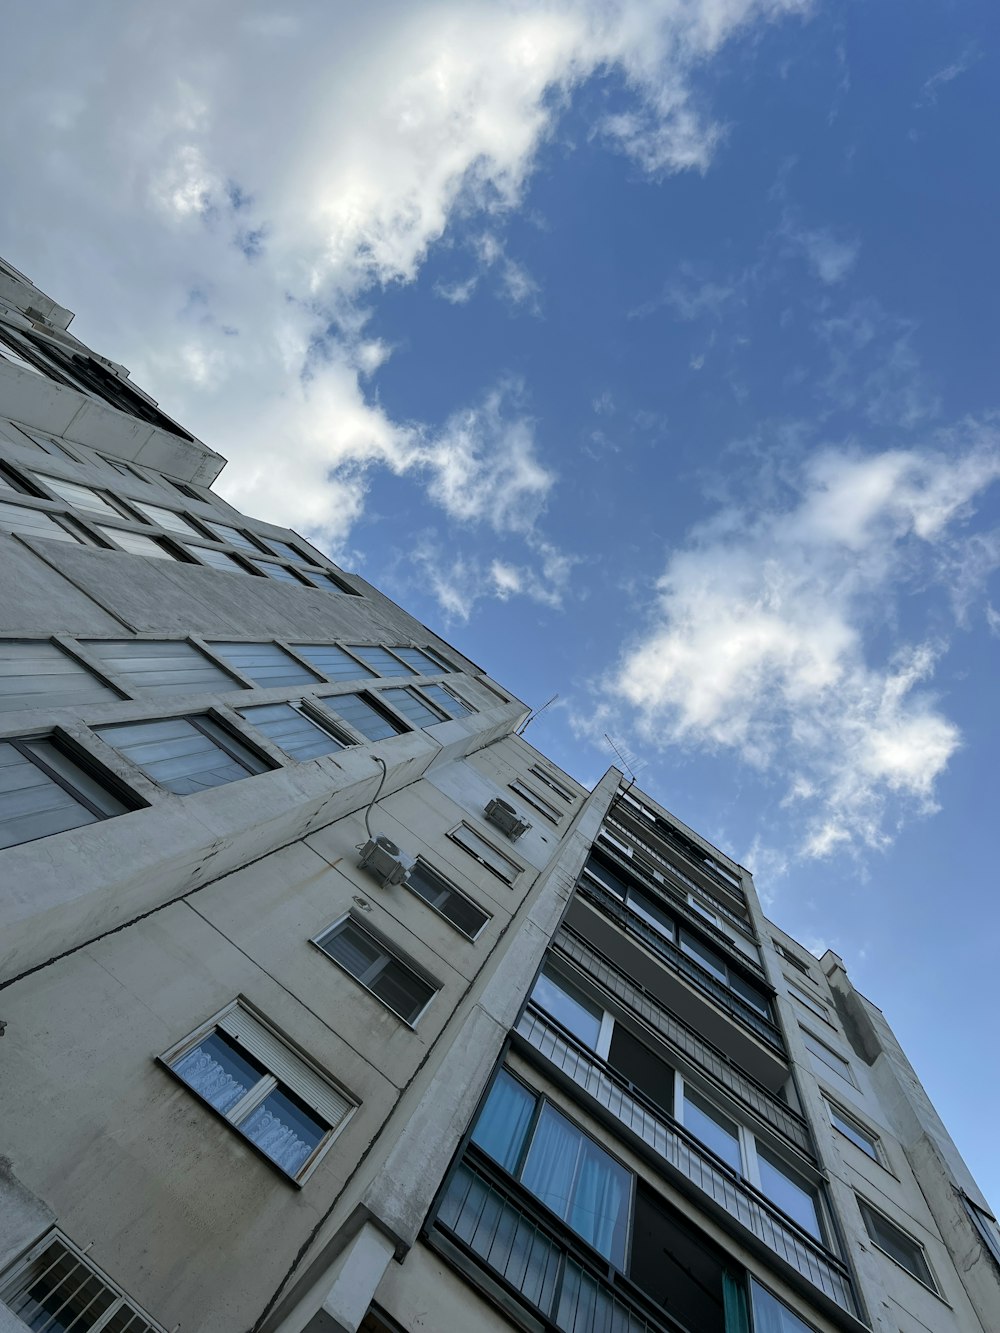 a tall building with lots of windows under a cloudy blue sky